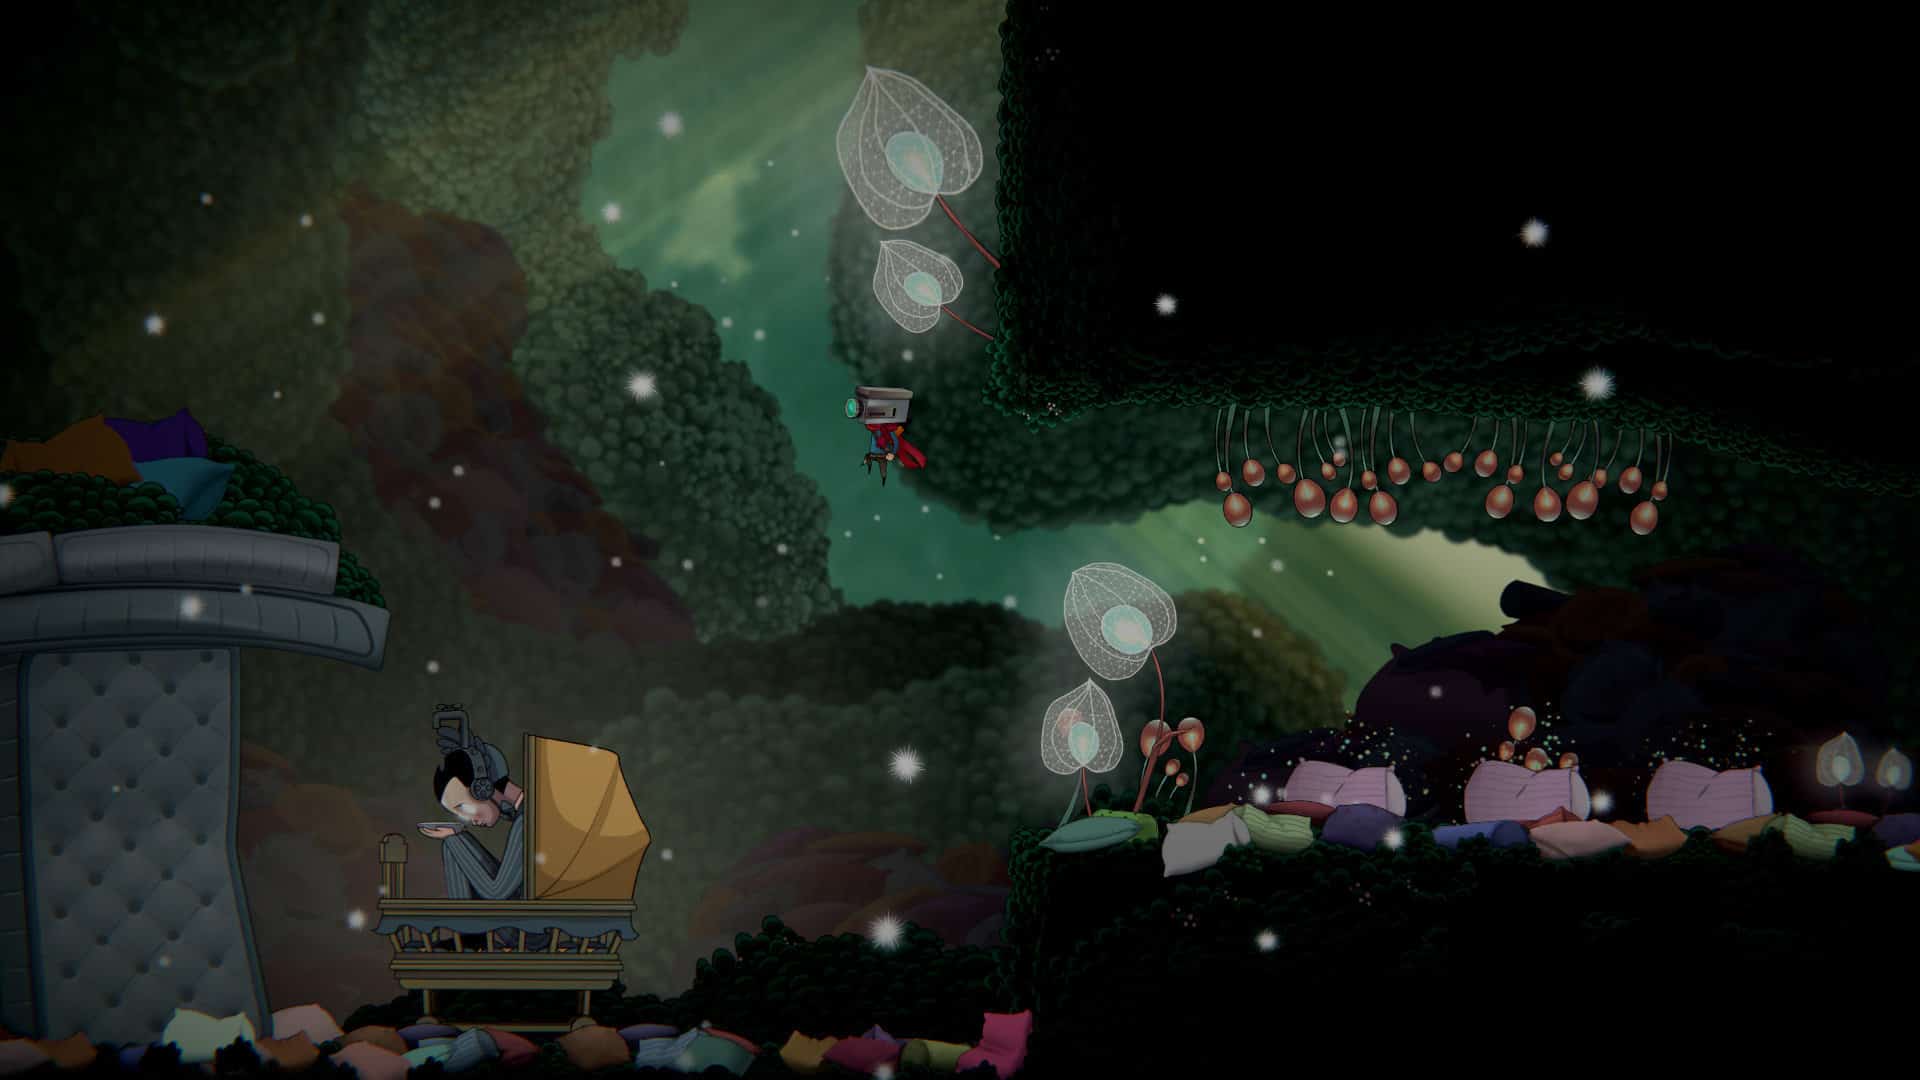 The Perfect Pencil is a surreal adventure inspired by Hollow Knight, coming to PC and Switch